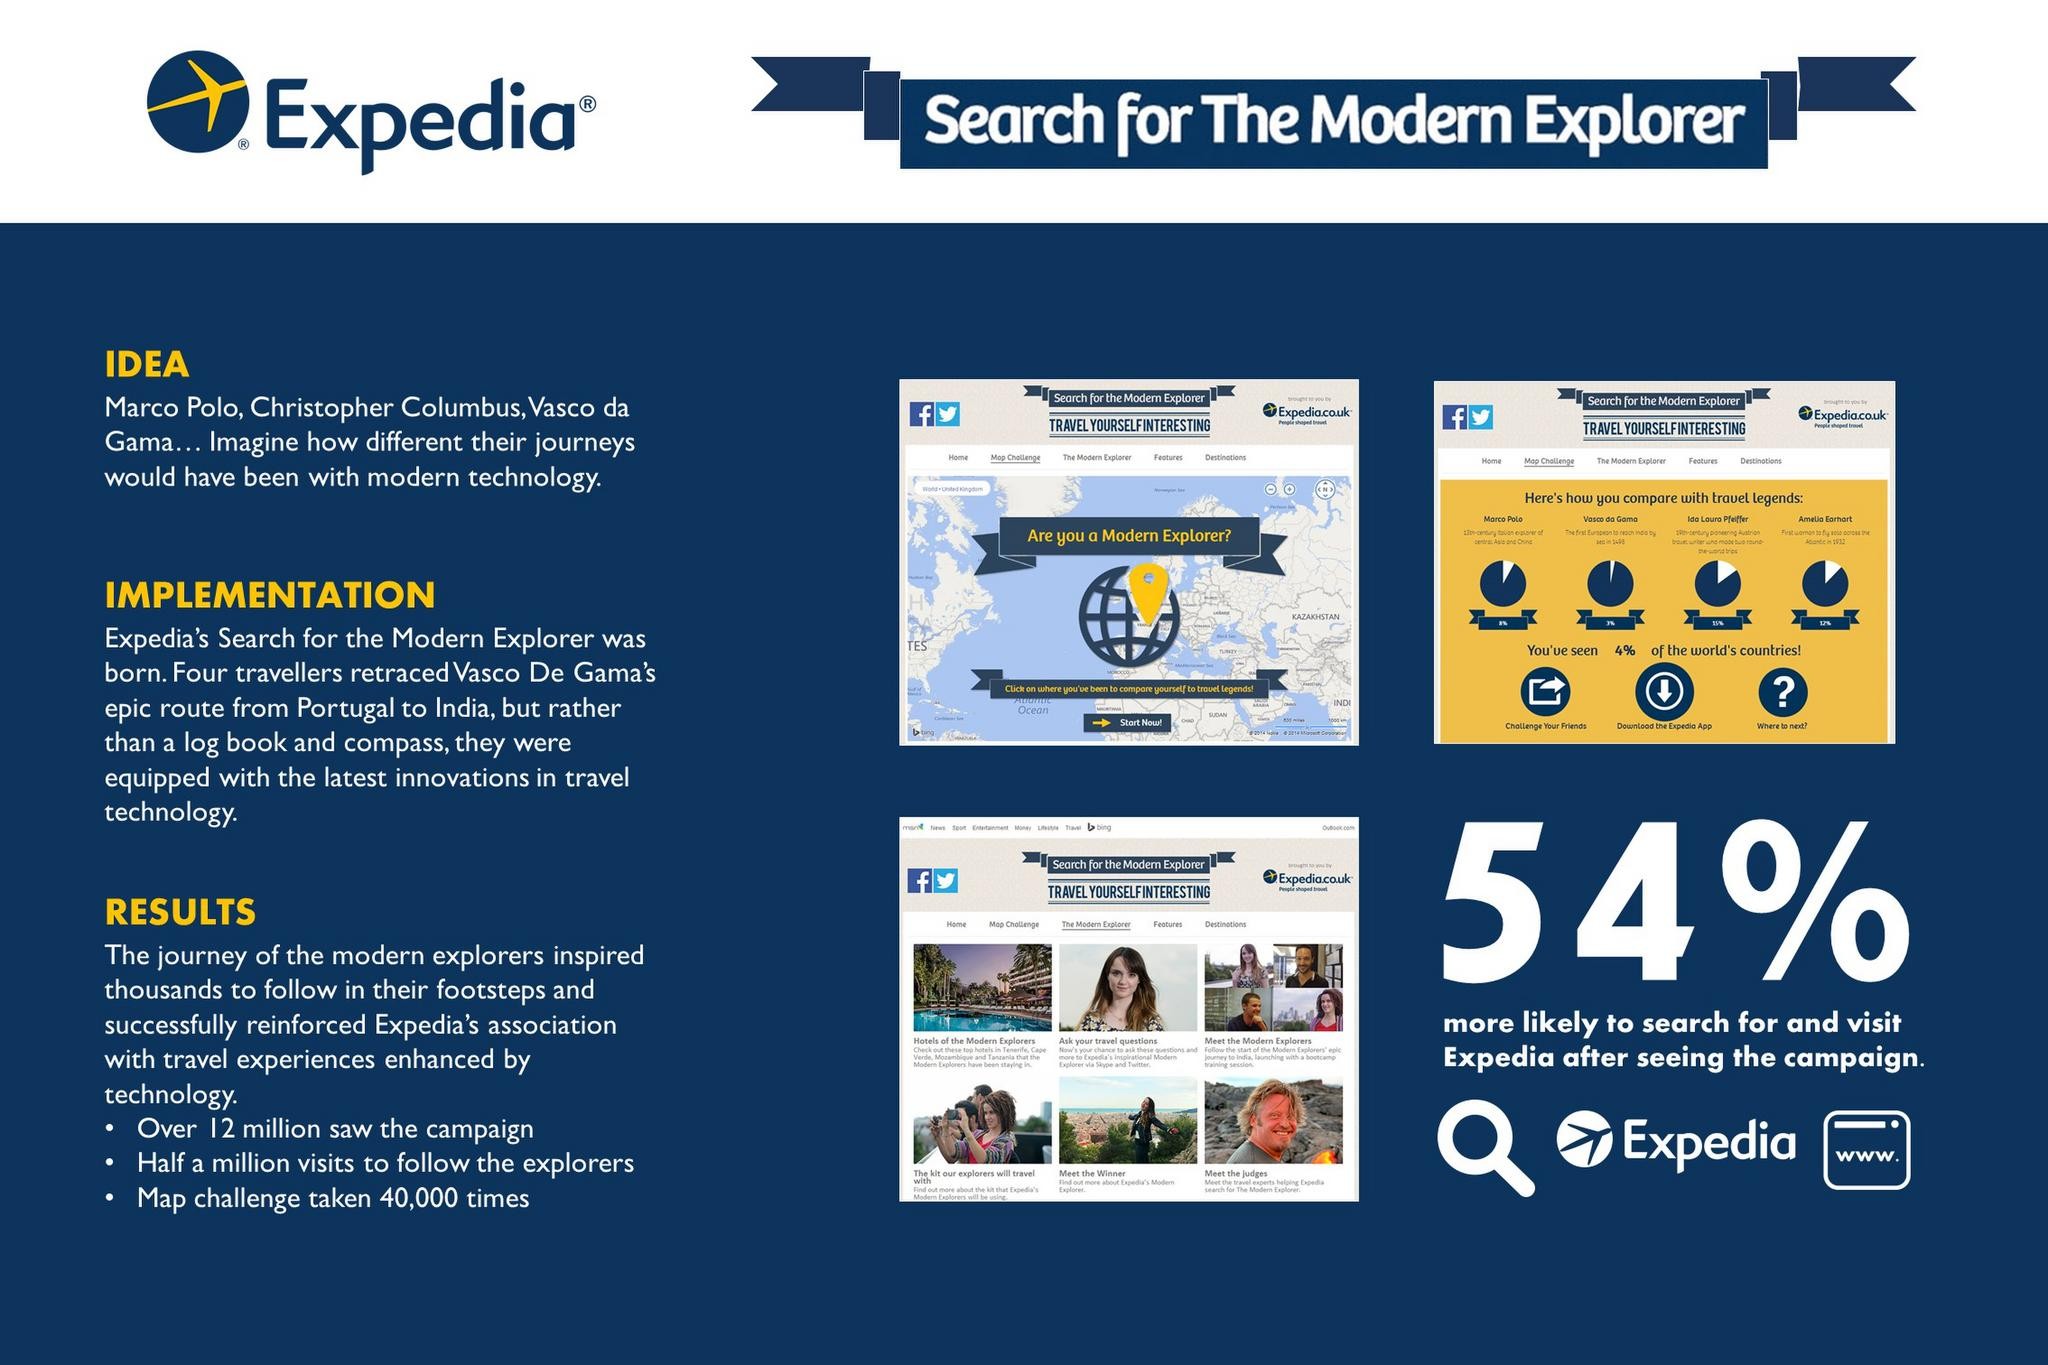 SEARCH FOR THE MODERN EXPLORER